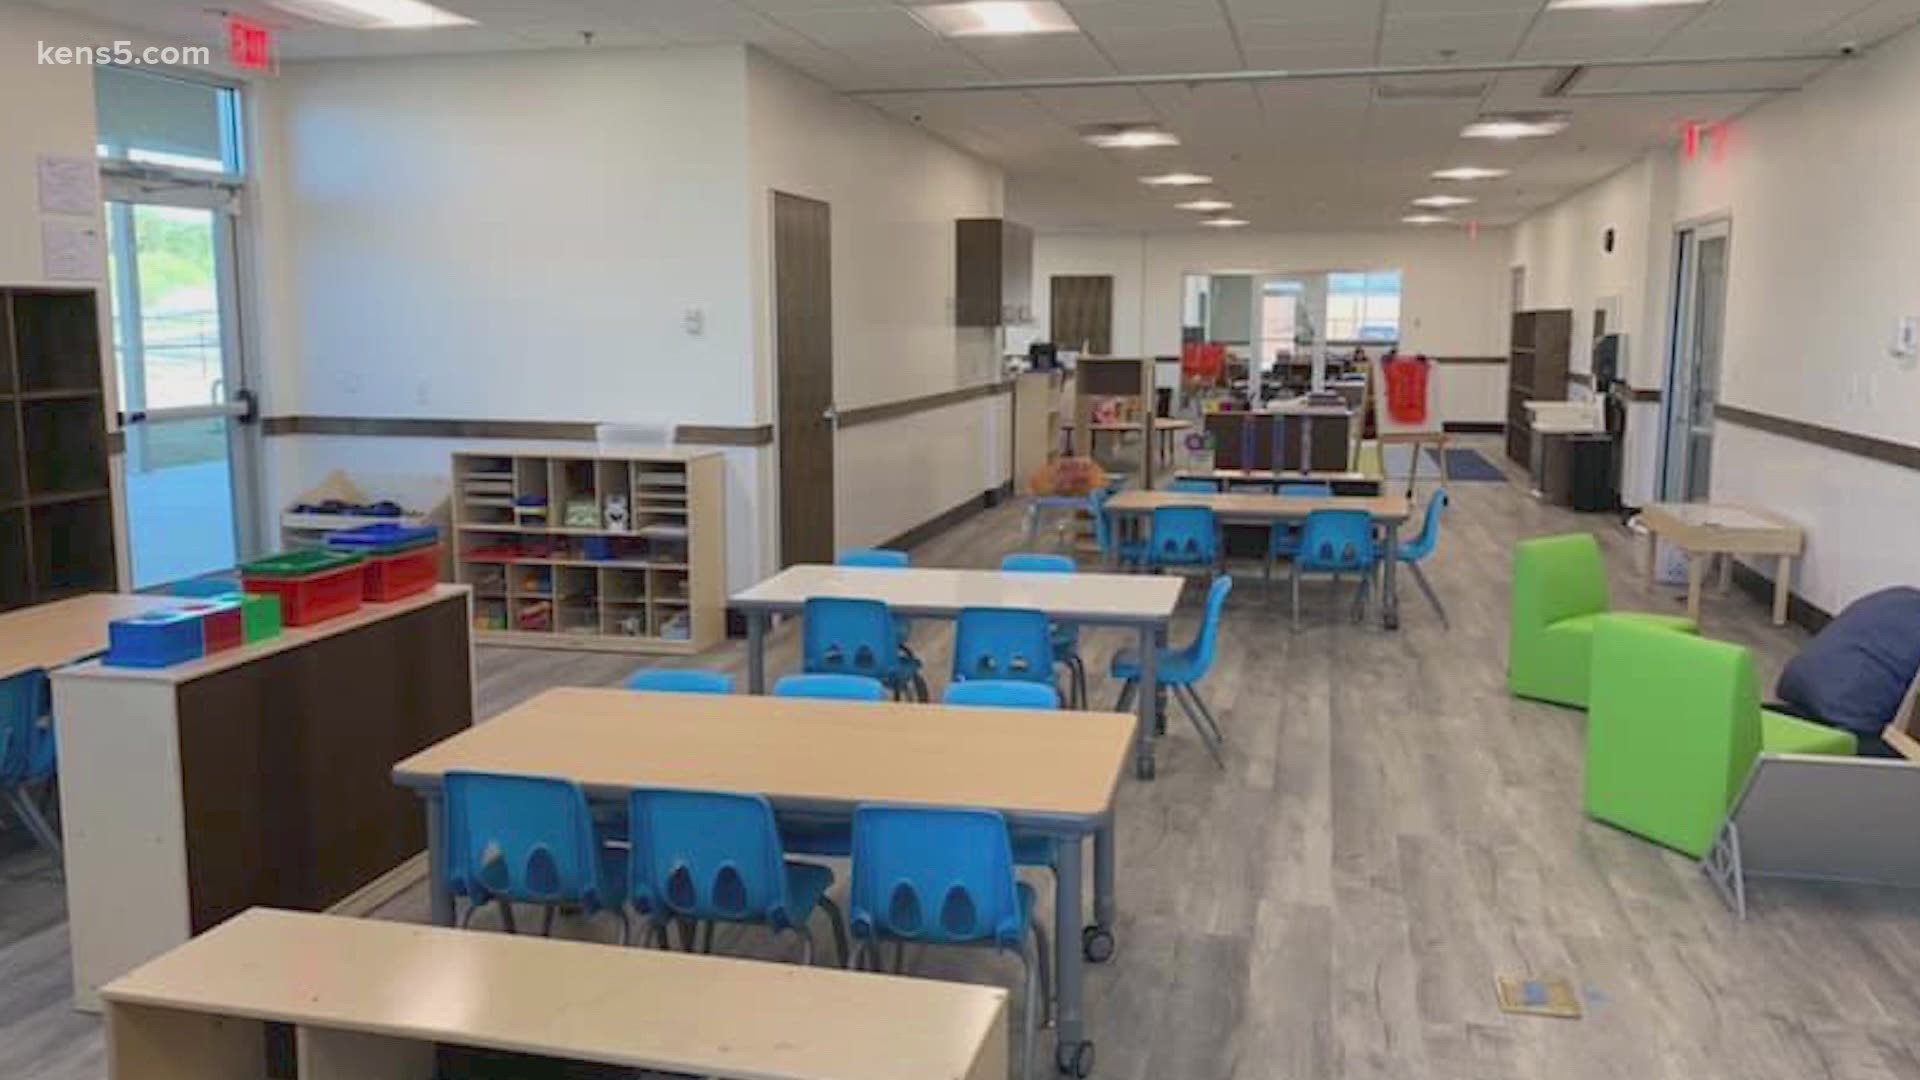 A south Texas academy is providing the opportunity, and the space, for kids to learn without having to stay home, if parents aren't ready to send them to school yet.